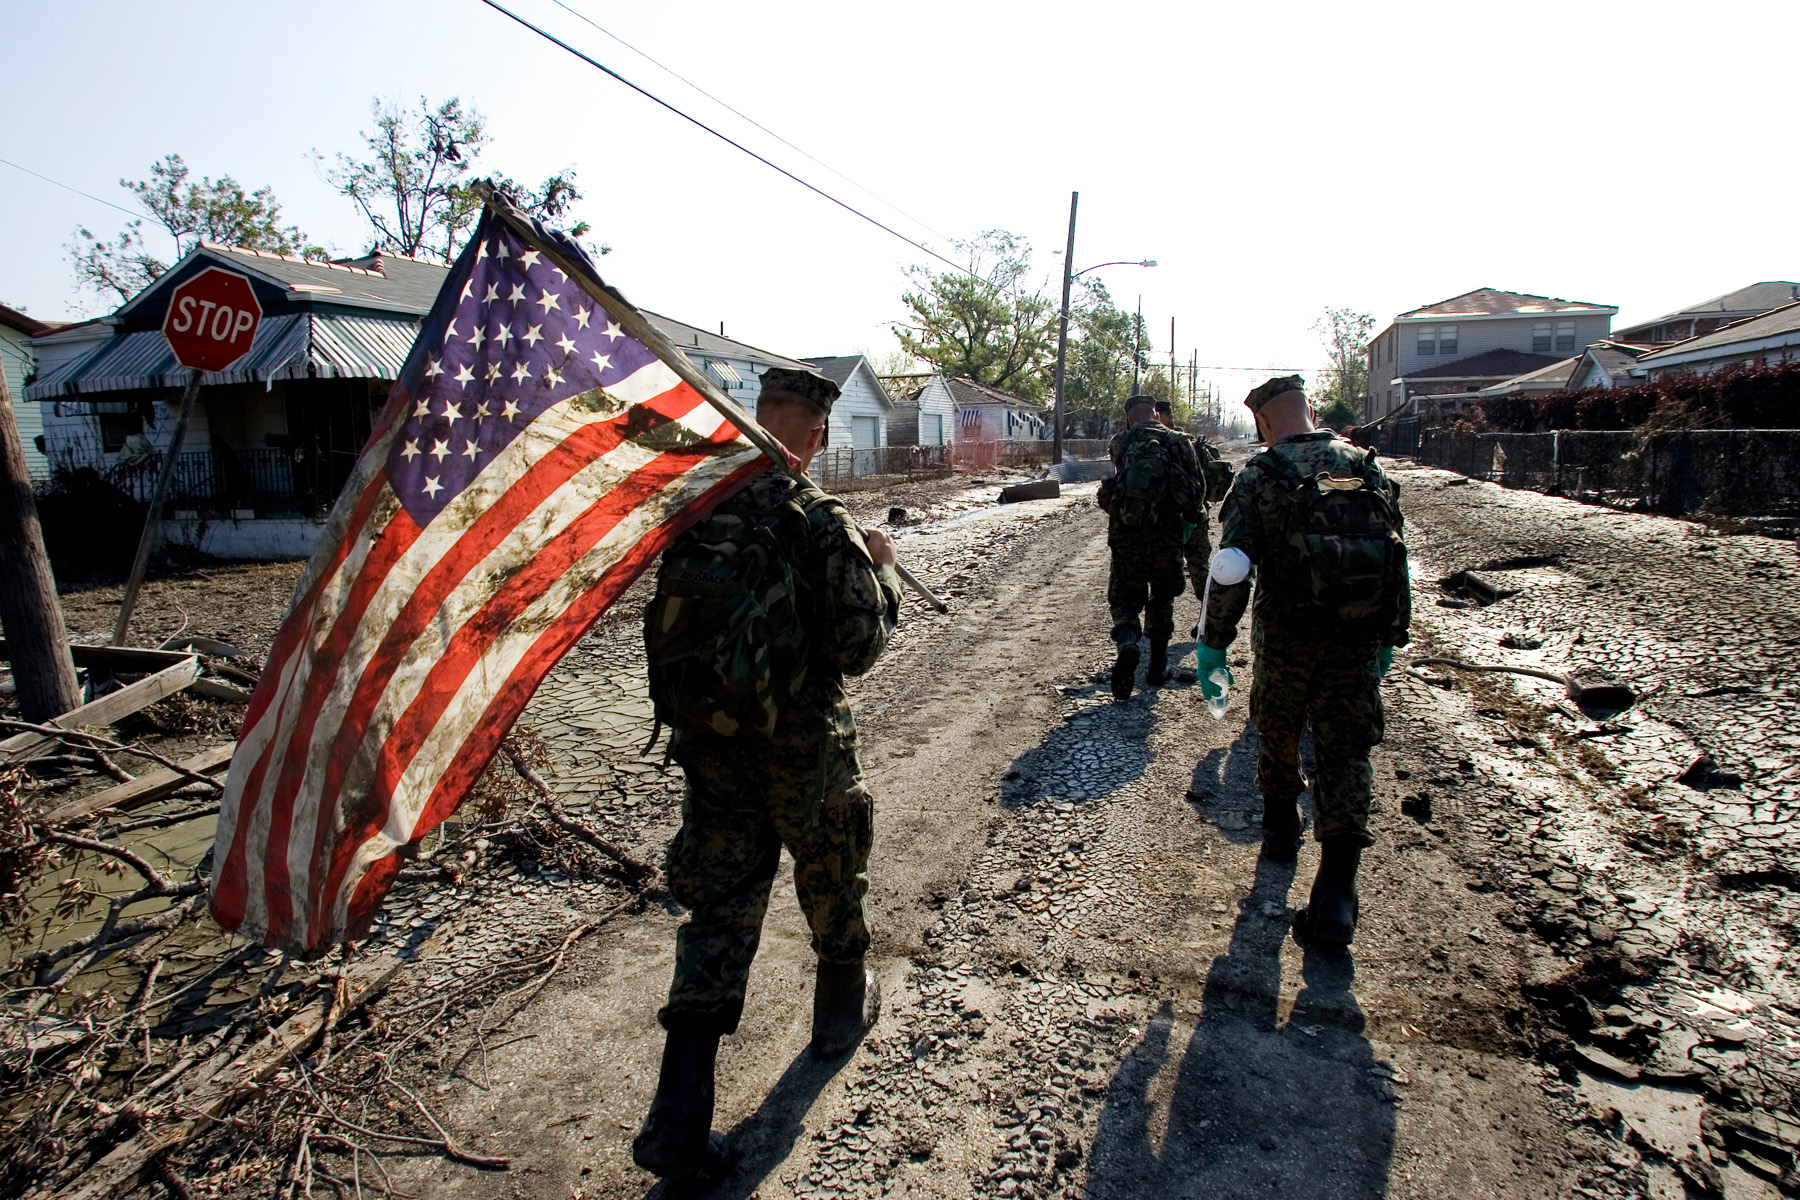 Marines in the Ninth Ward of New Orleans after Hurricane Katrina (Ted Soqui—Corbis/Getty Images)